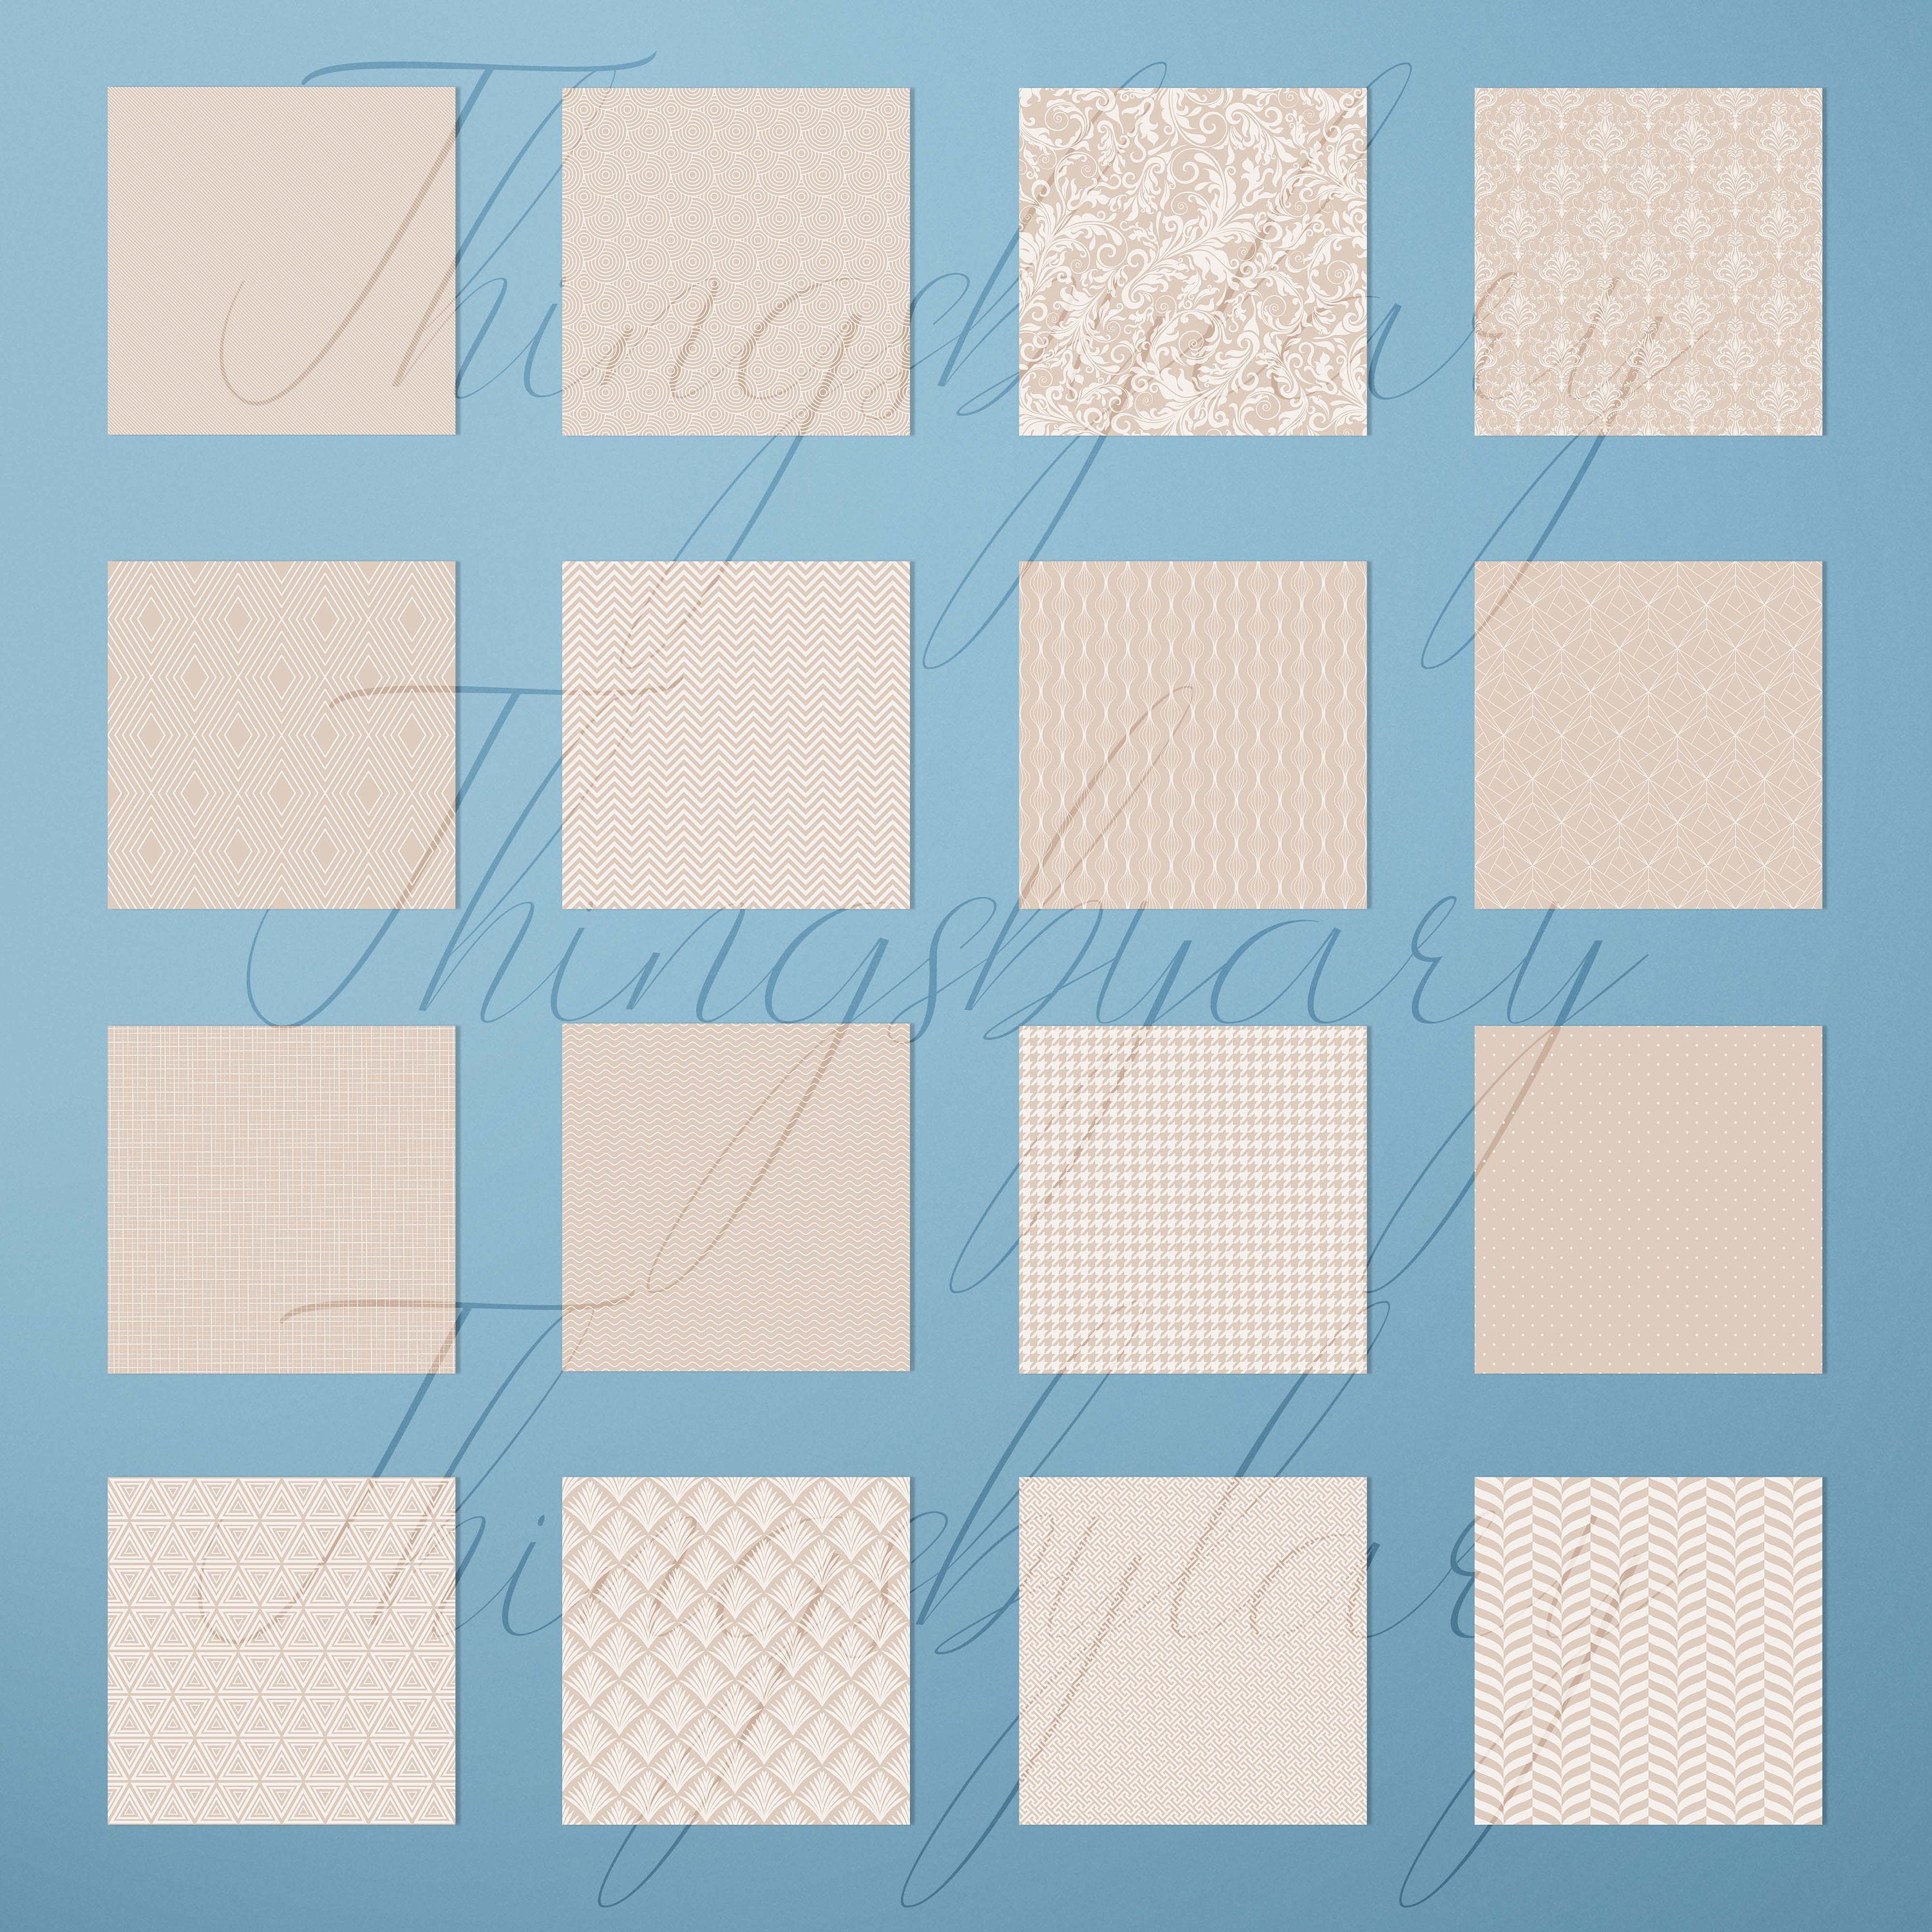 16 Seamless Luxury Beige Neutral Sand Dollar Digital Papers 300 dpi commercial use art deco houndstooth pastel paper herringbone shabby chic